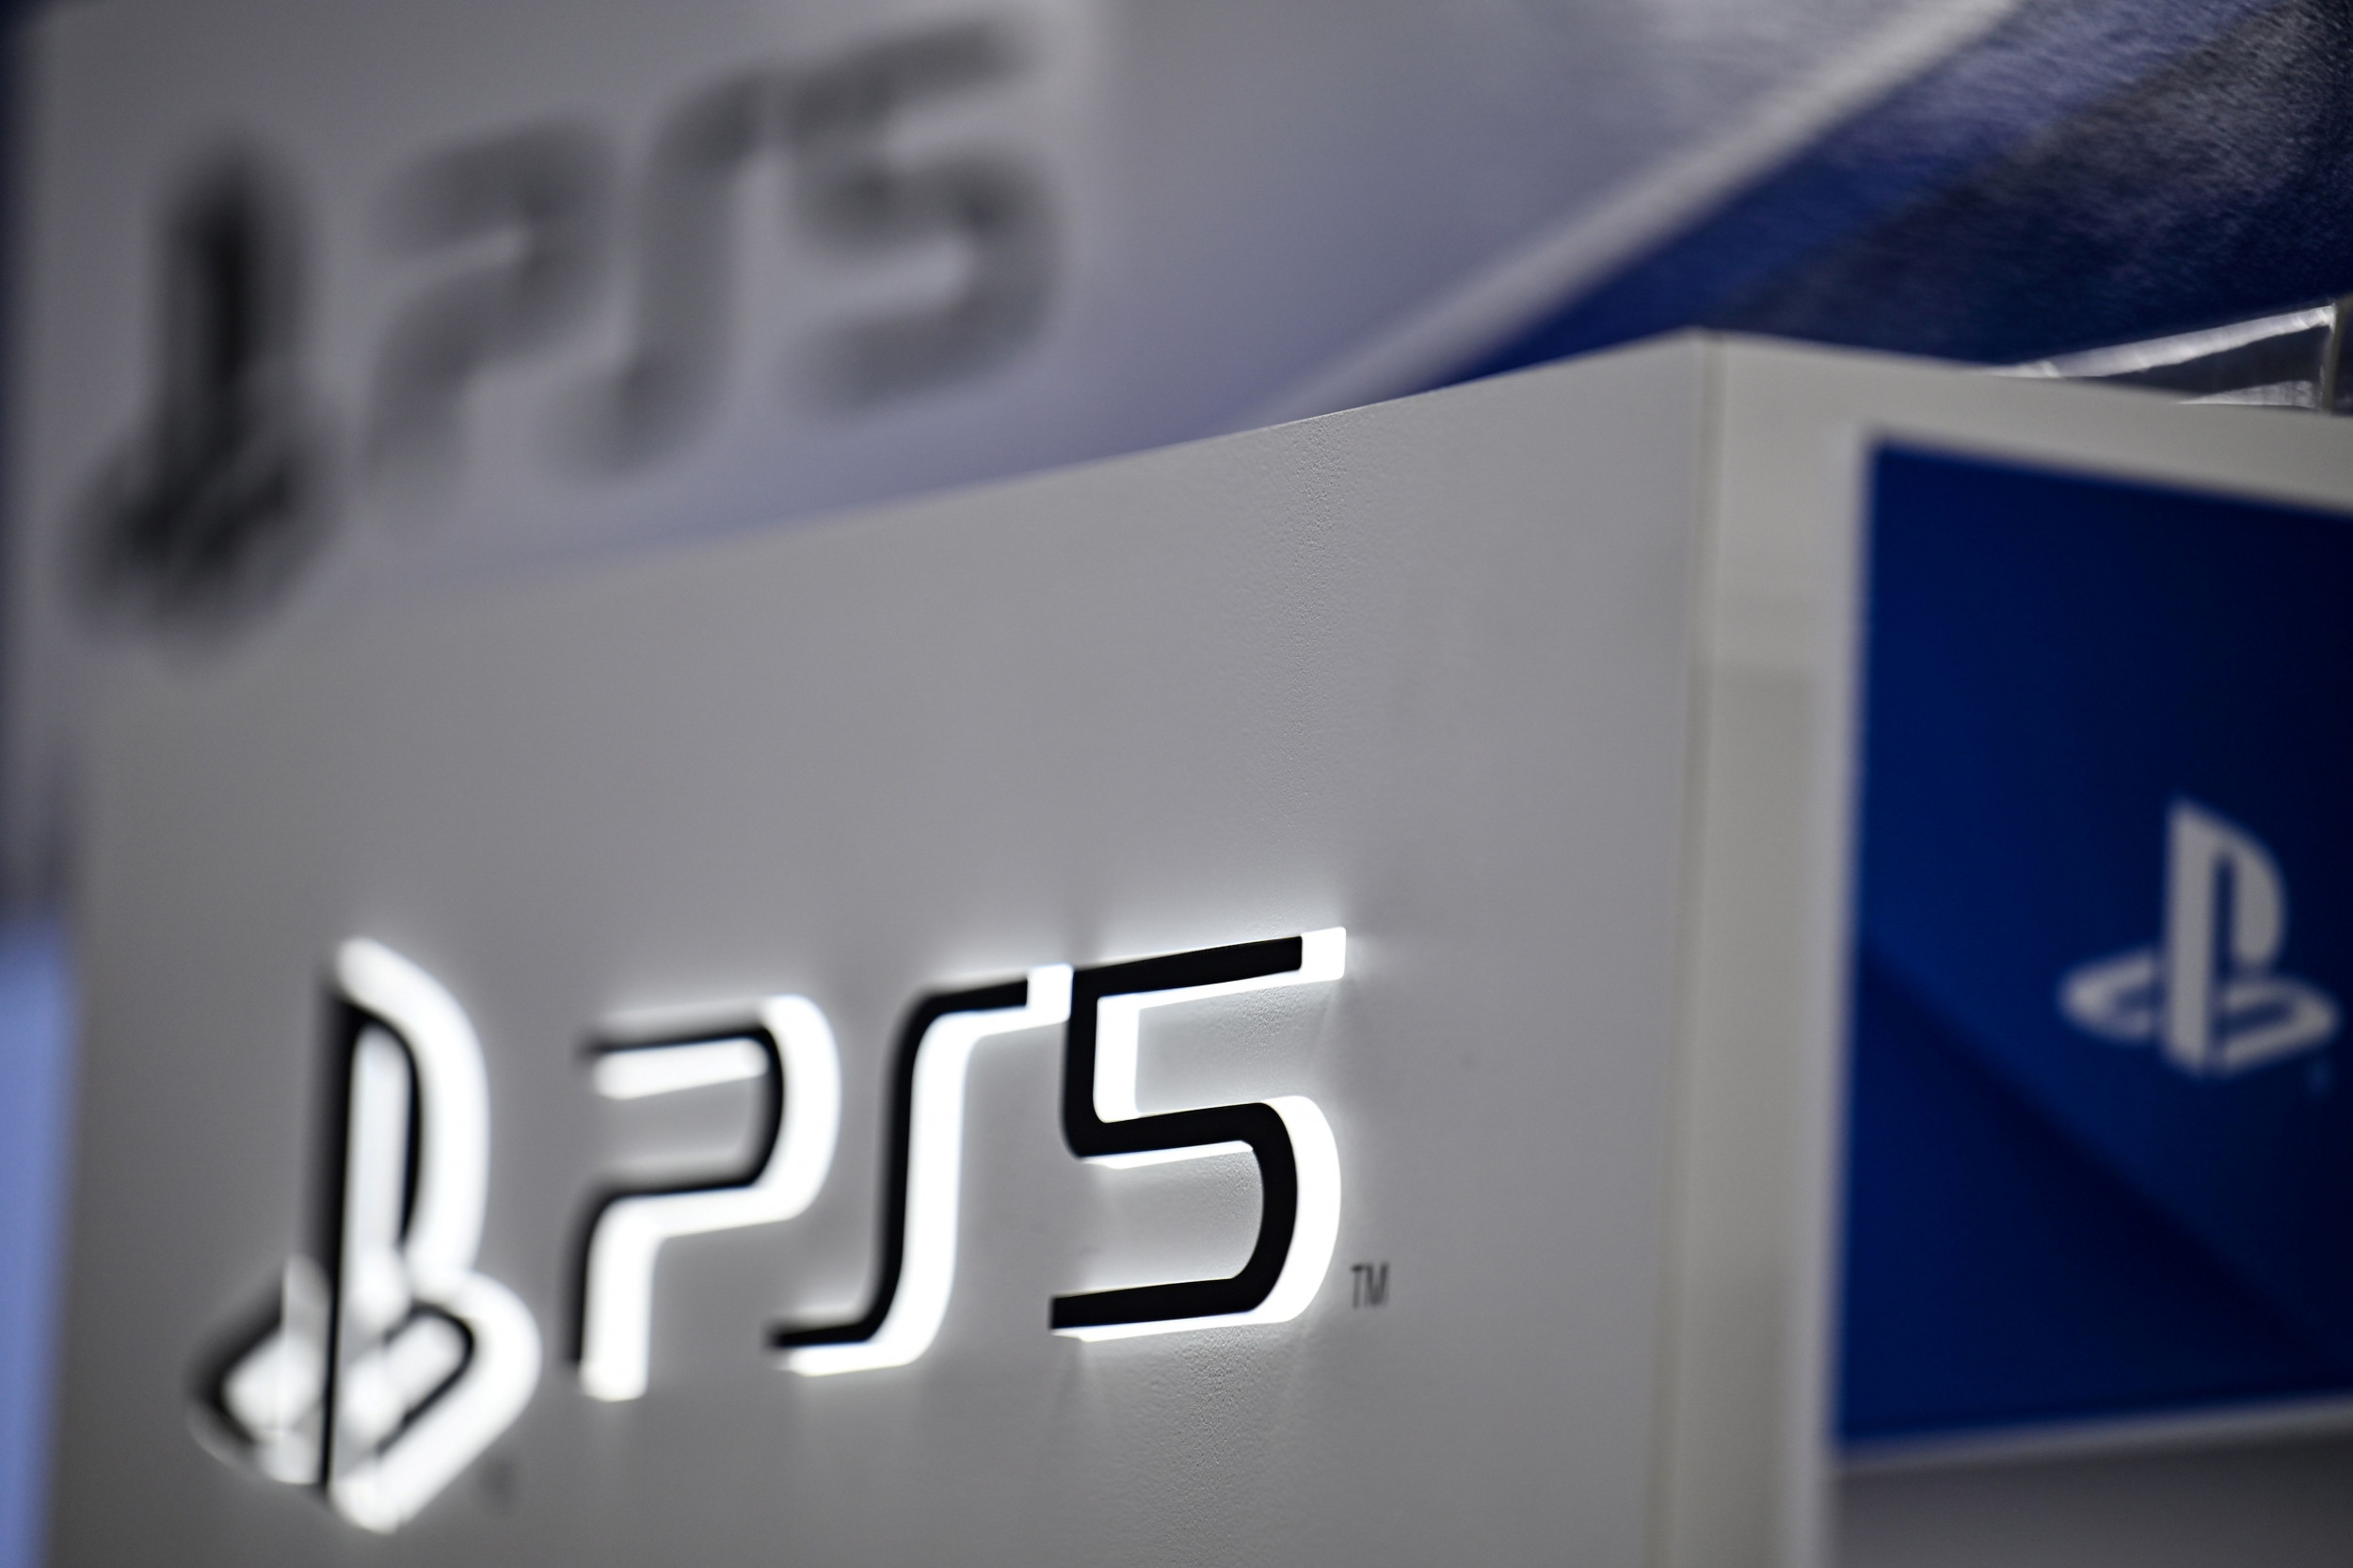 PS5 refueling updates for Target, Amazon, Best Buy, GameStop, Newegg and more